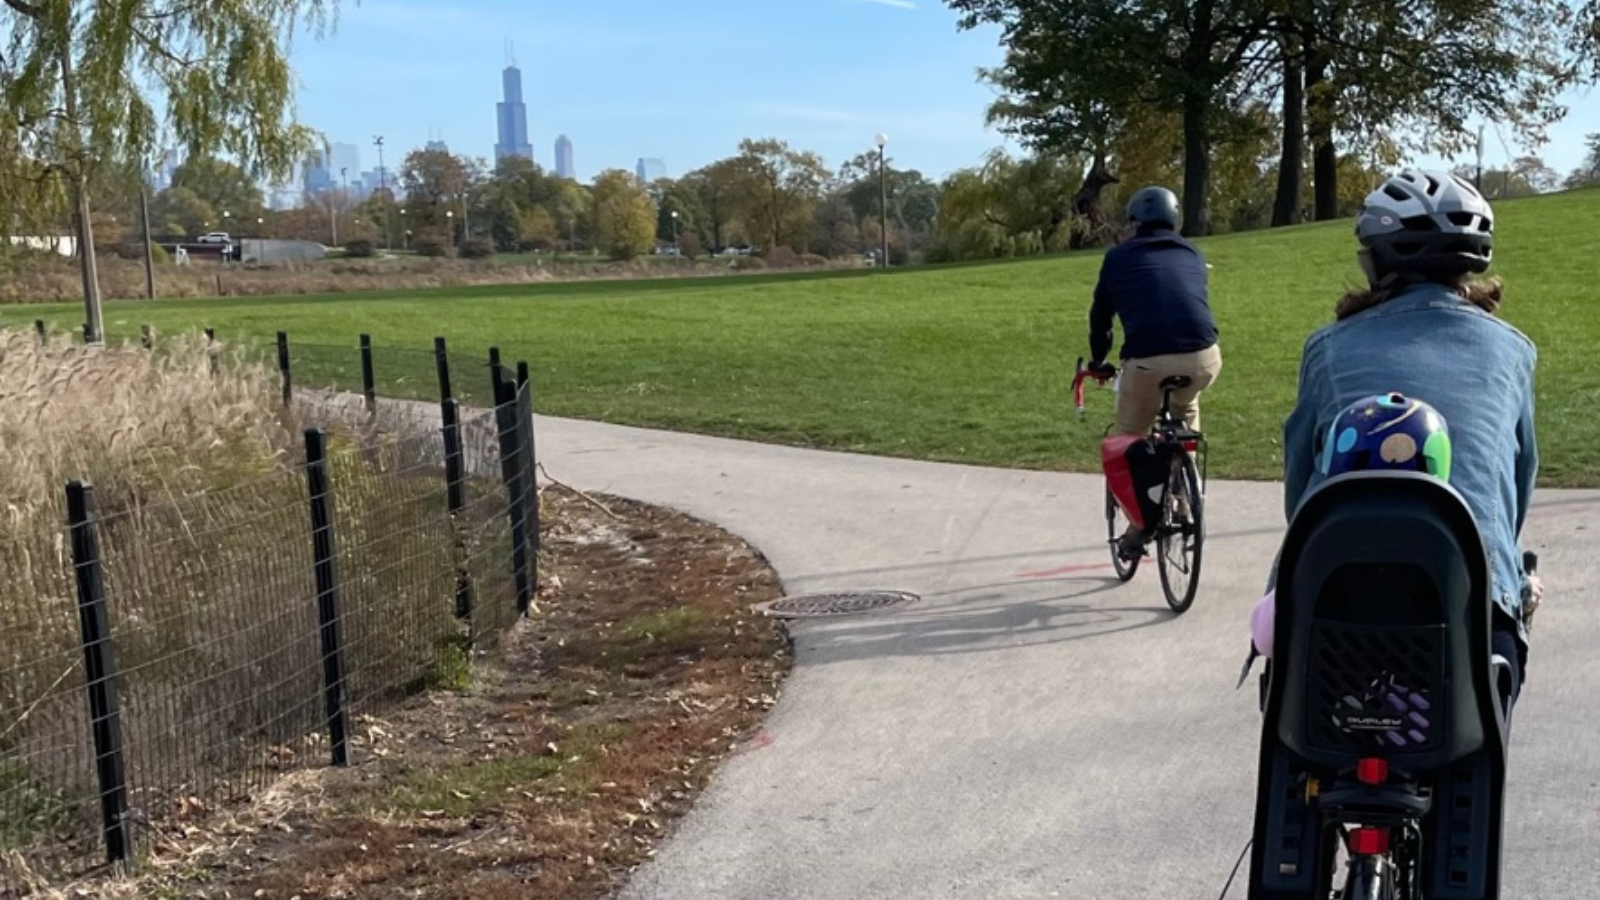 Family riding bikes on a path with Chicago skyline in the background